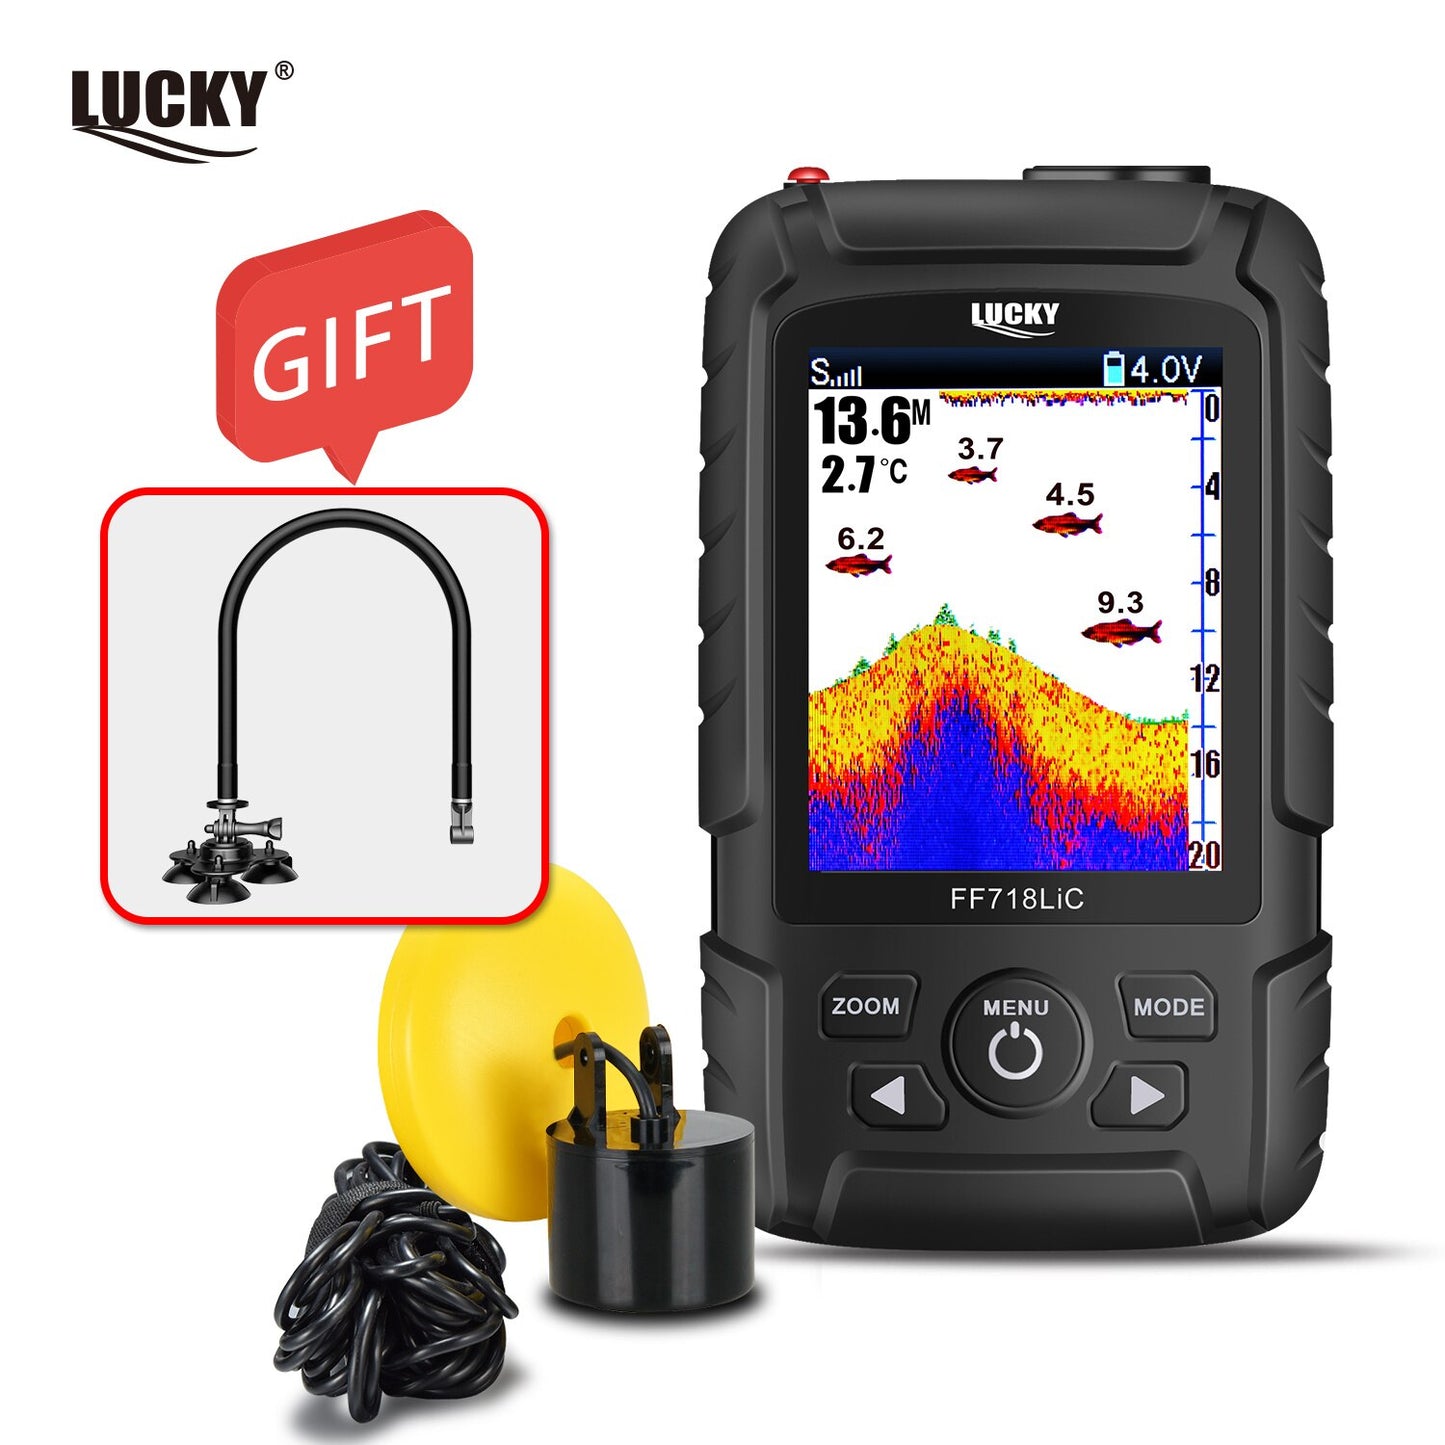 Russian menu!LUCKY FF718LiCD-T 2.8&quot; Color LCD Portable Fish Finder 200KHz/83KHz Dual Sonar Frequency 328ft Detection sonar